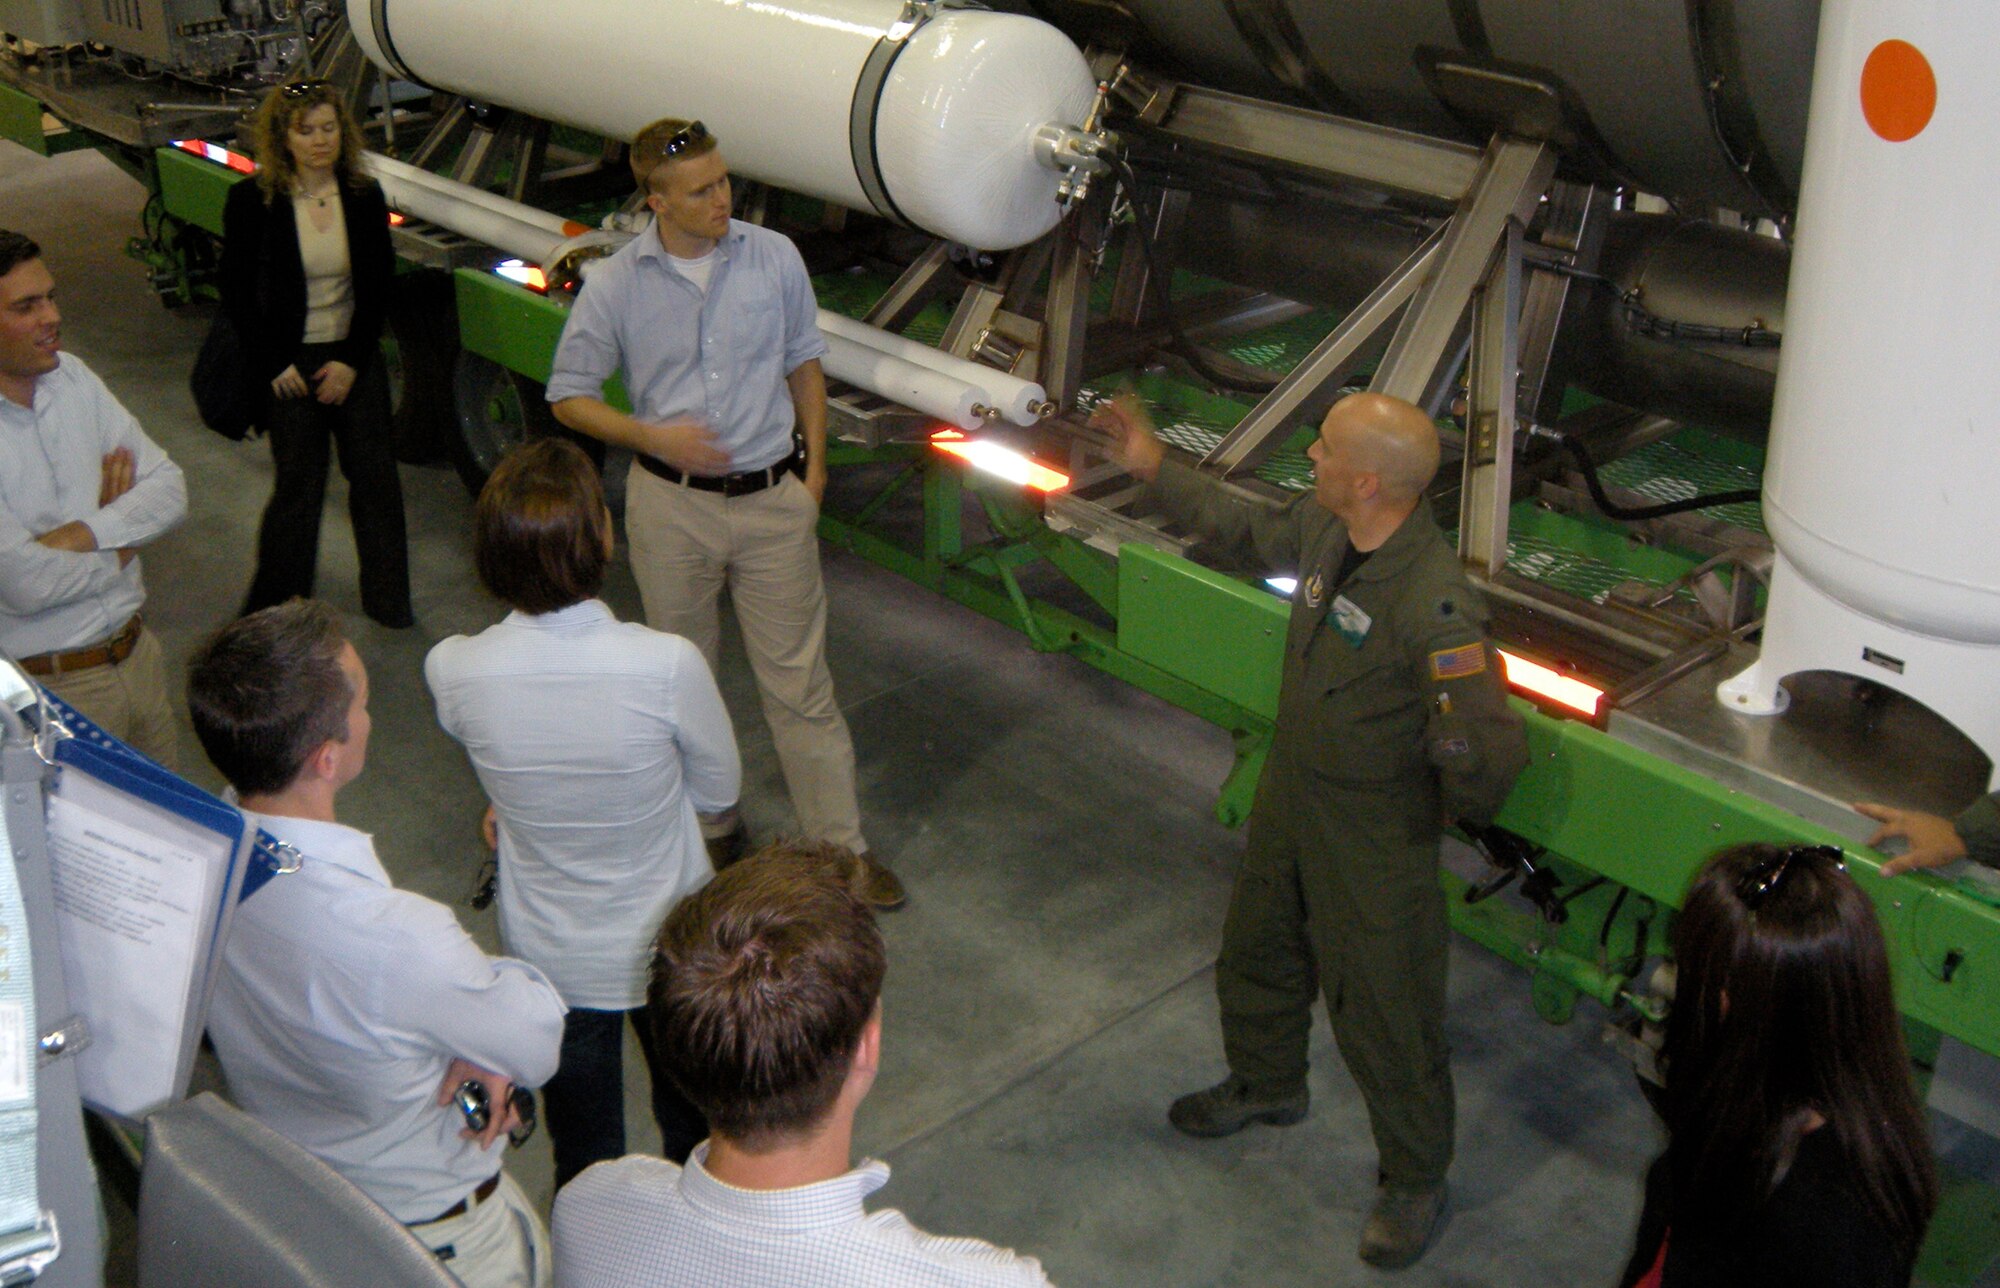 Lt. Col. David Condit, 302nd Airlift Wing chief of safety and Modular Airborne Firefighting Systems coordinator for the Air Force Reserve, shows the 'MAFFS II' system to Congressional staffers August 27 at Peterson Air Force Base, Colo. The staffers, from Colorado, California and Delaware, visited the 302nd AW after receiving a 'From The Field' brief in early August on the AF Reserve's civil support mission of aerial firefighting, located exclusively at Peterson. The staffers also received a local orientation flight through the Rocky Mountains, giving them a better understanding of the capabilities of the C-130 Hercules tactical transport aircraft. (U.S. Air Force photo/Staff Sgt. Stephen J. Collier)